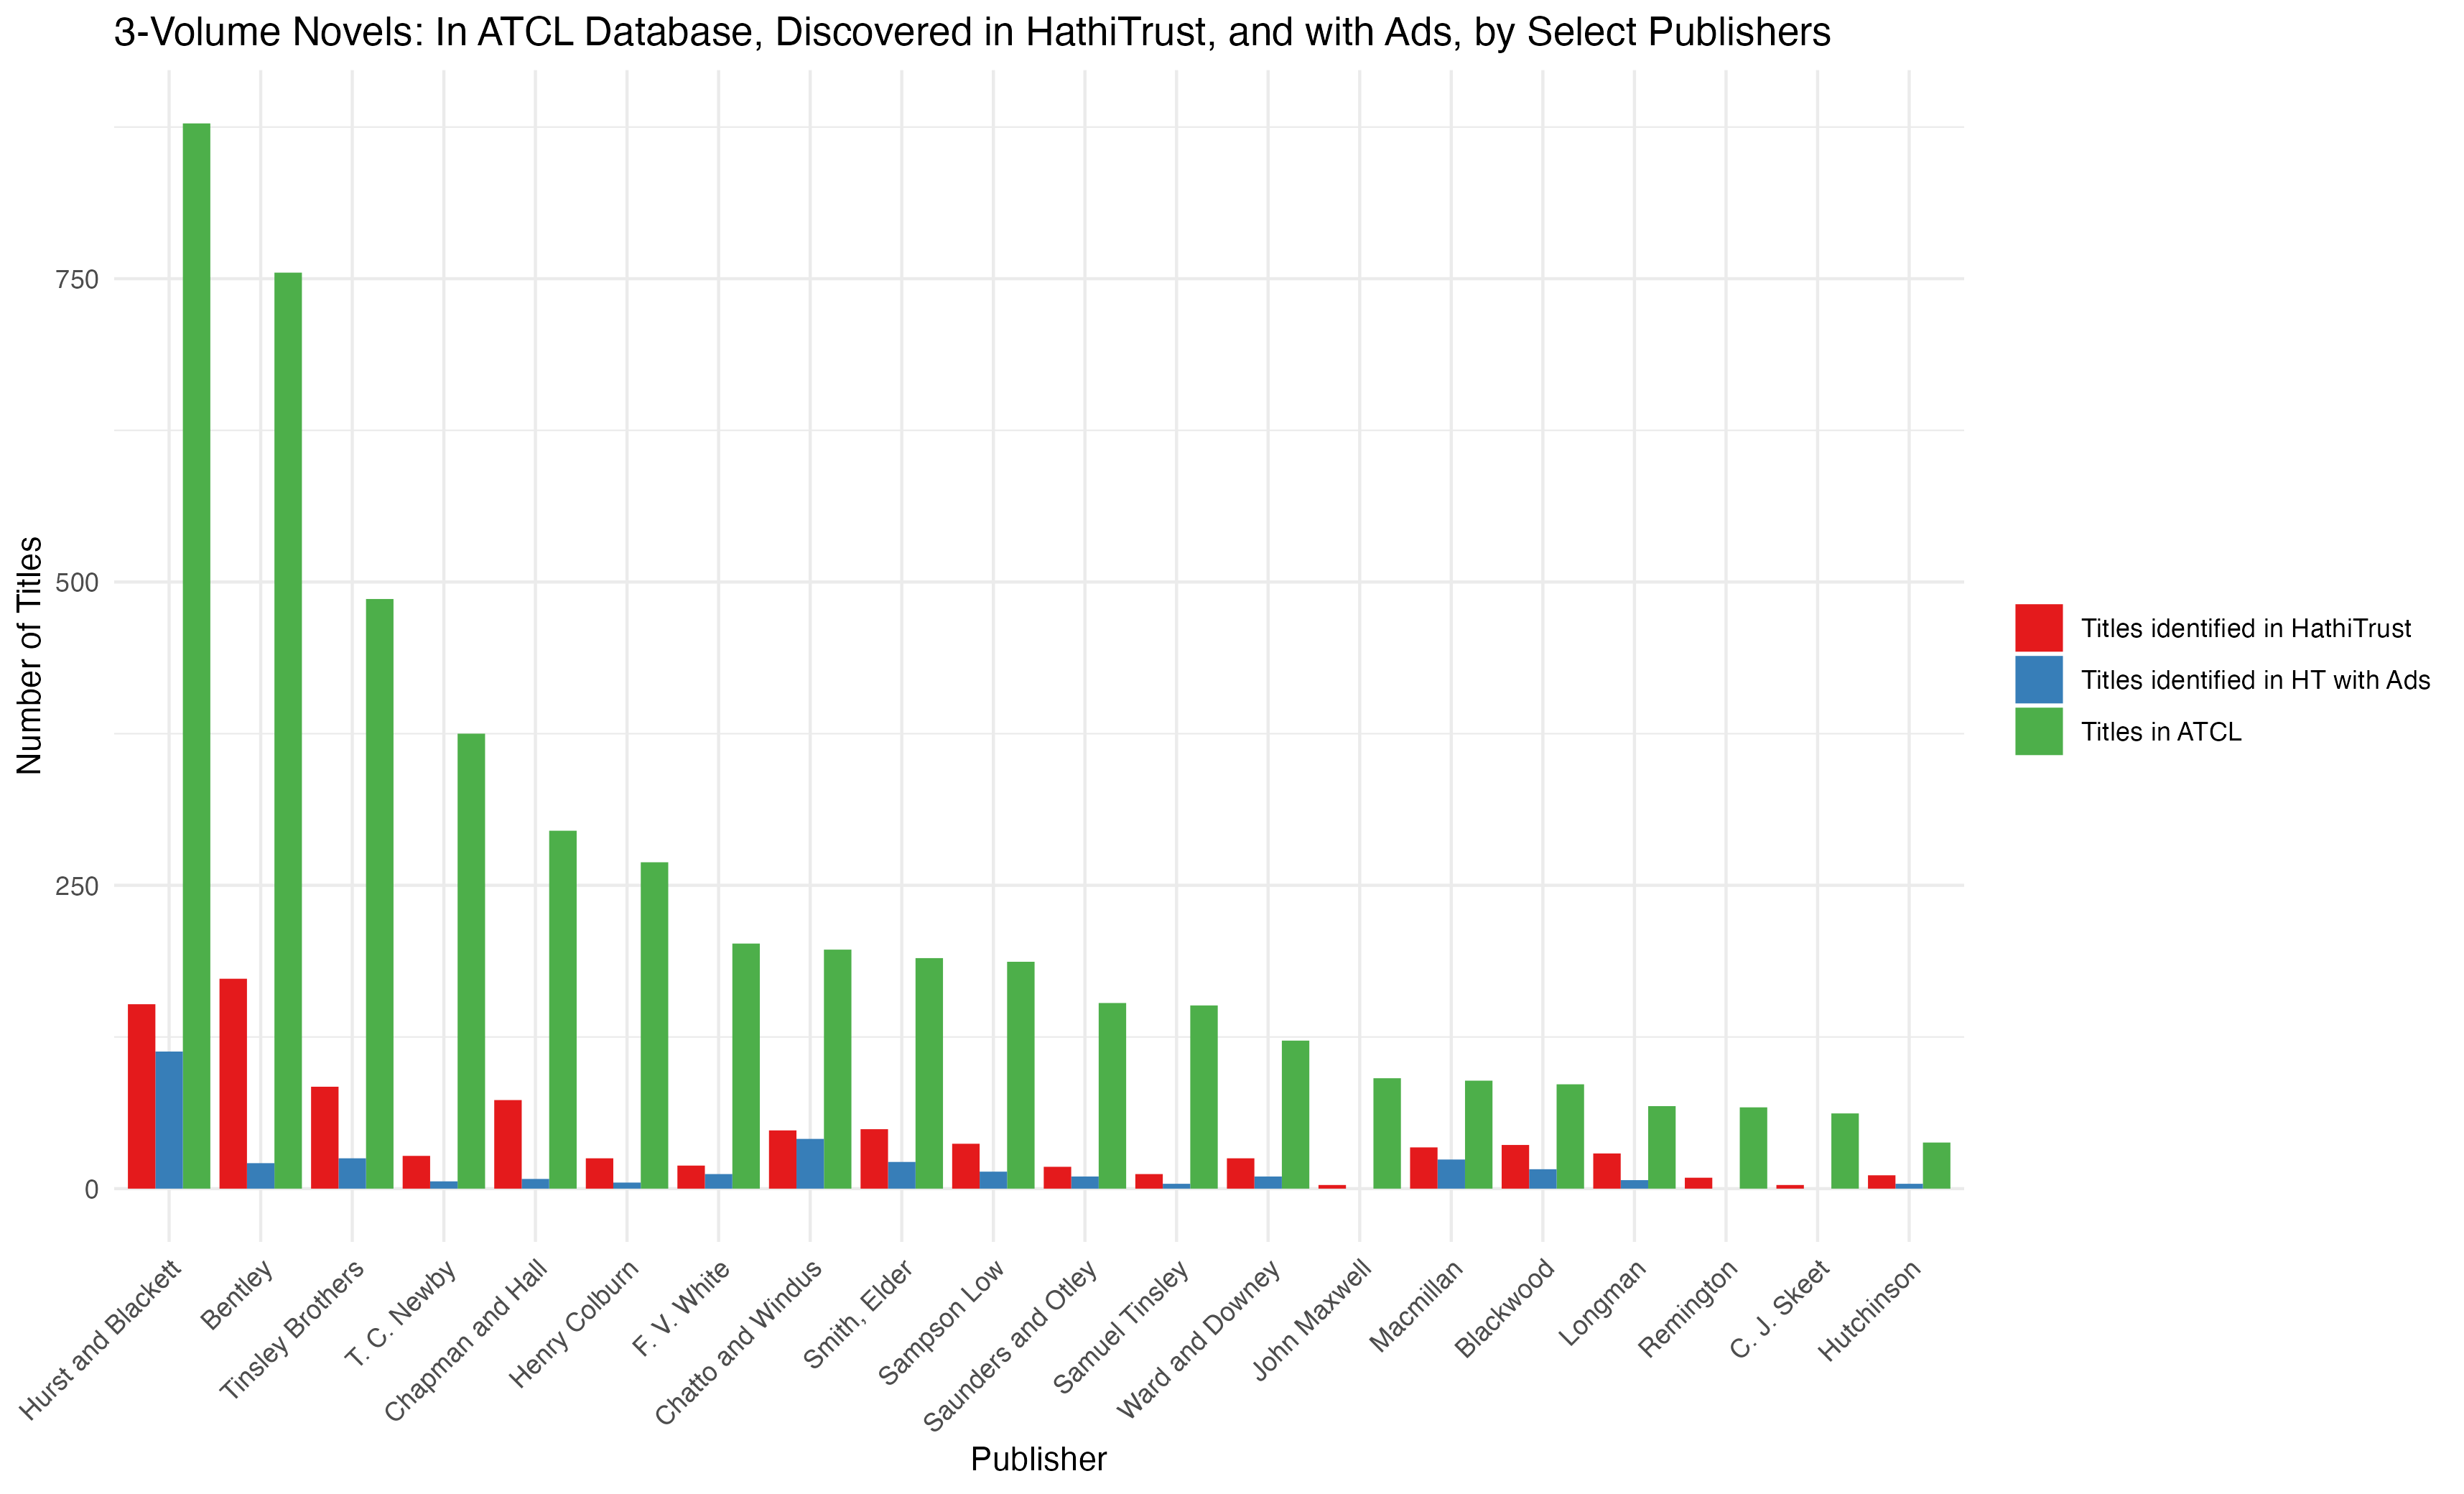 Comparison of the number of titles listed in ATCL, number of titles identified in HathiTrust, and number of titles with advertising.